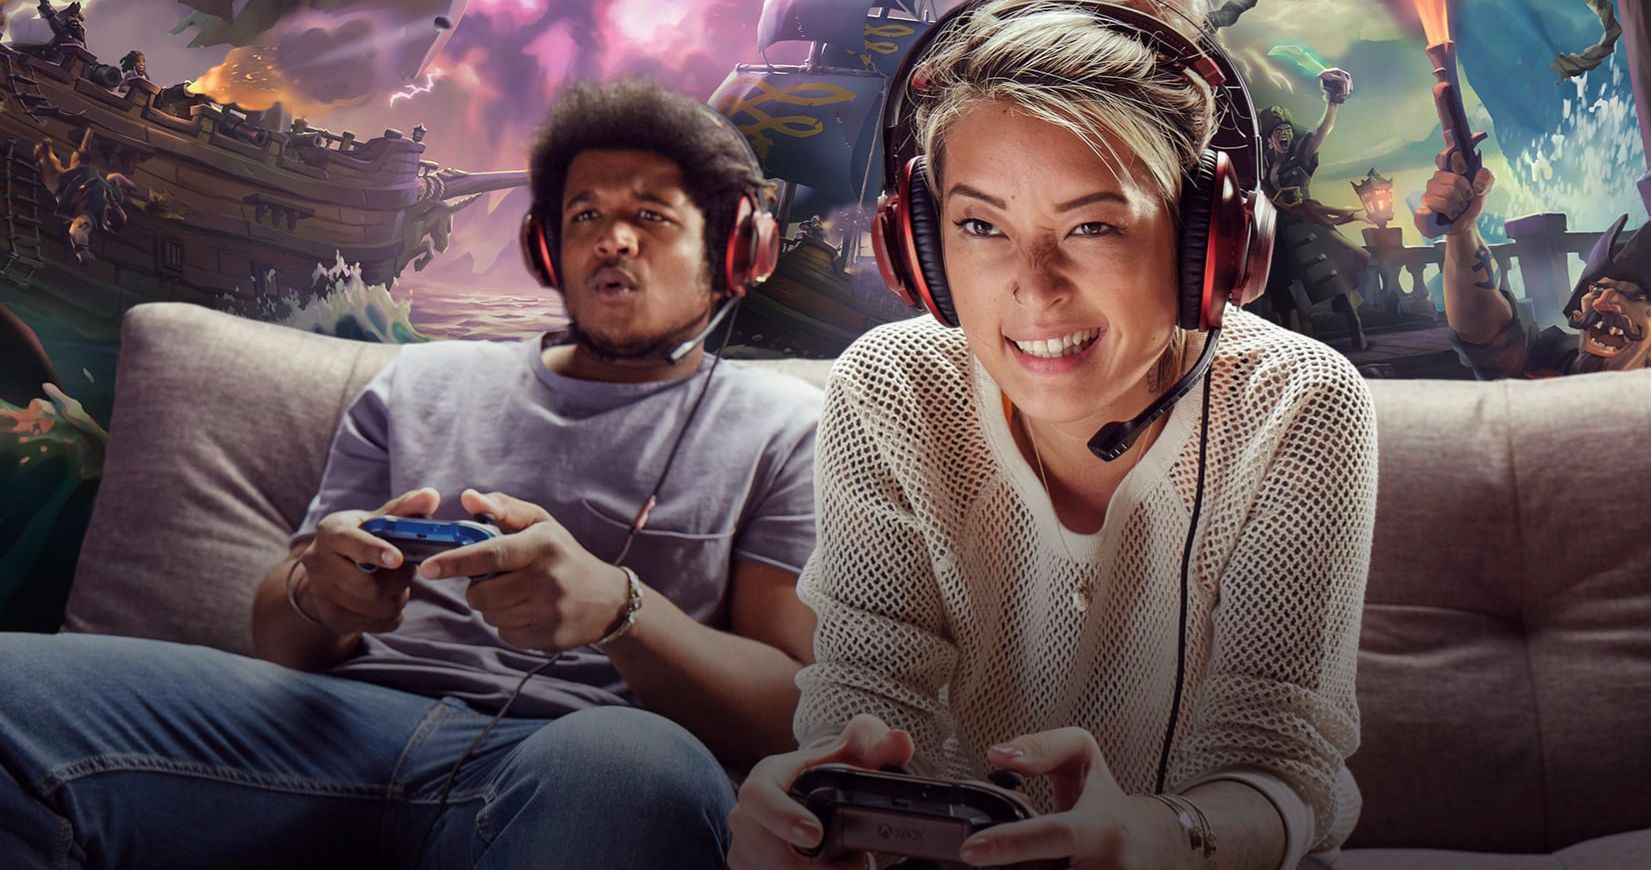 Xbox Players Are More Toxic Than PlayStation Gamers According to New Video Game Study